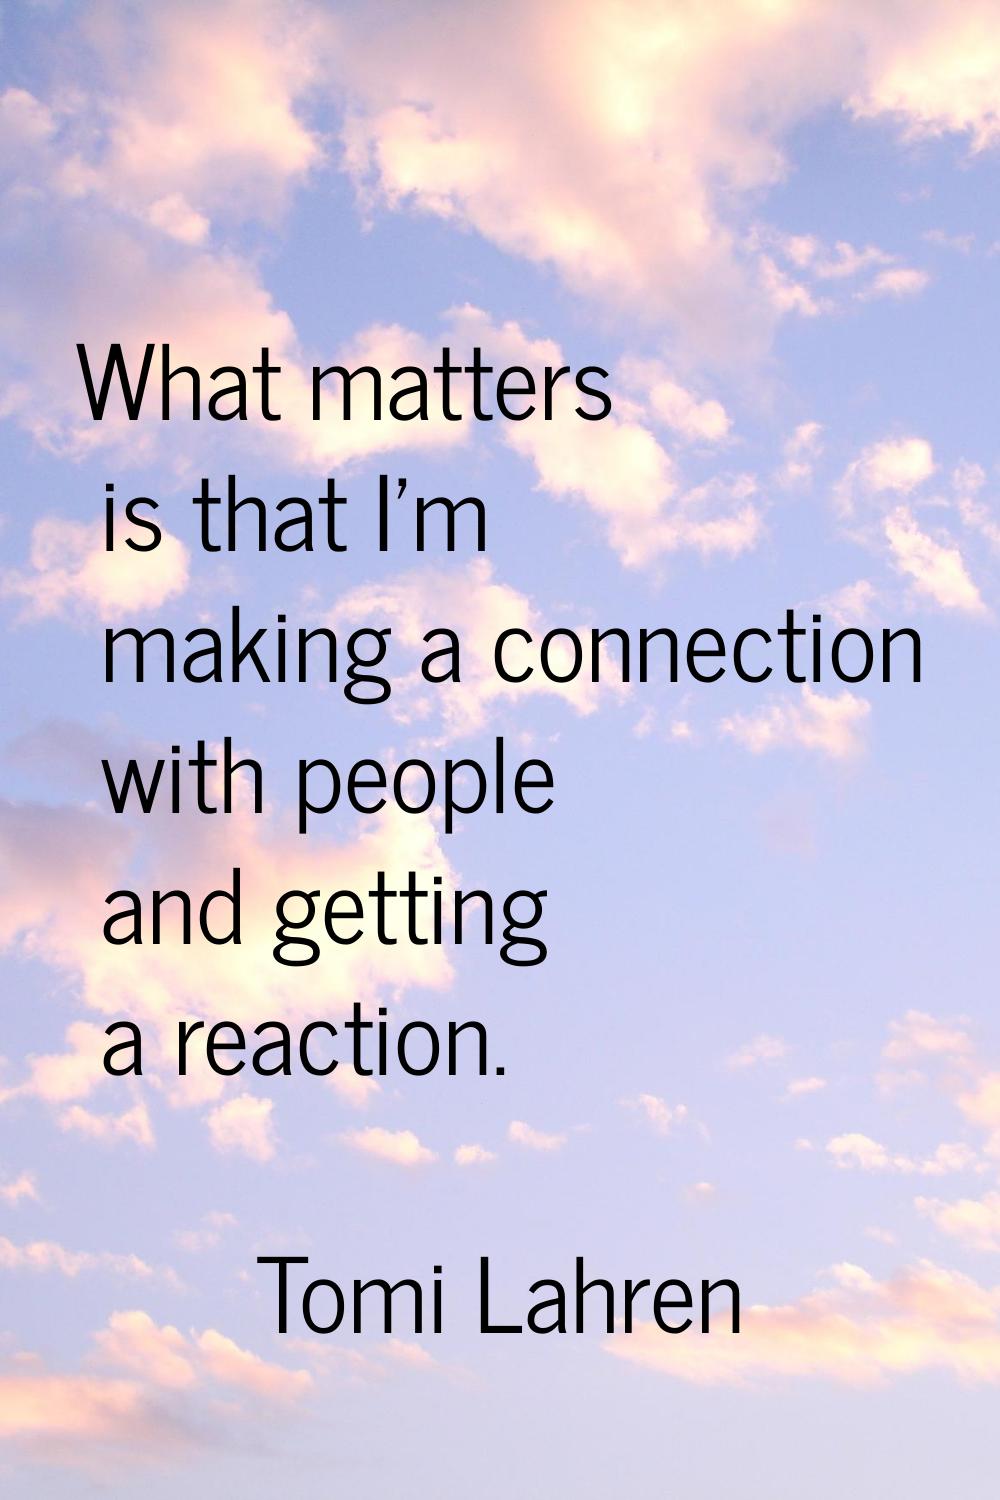 What matters is that I'm making a connection with people and getting a reaction.